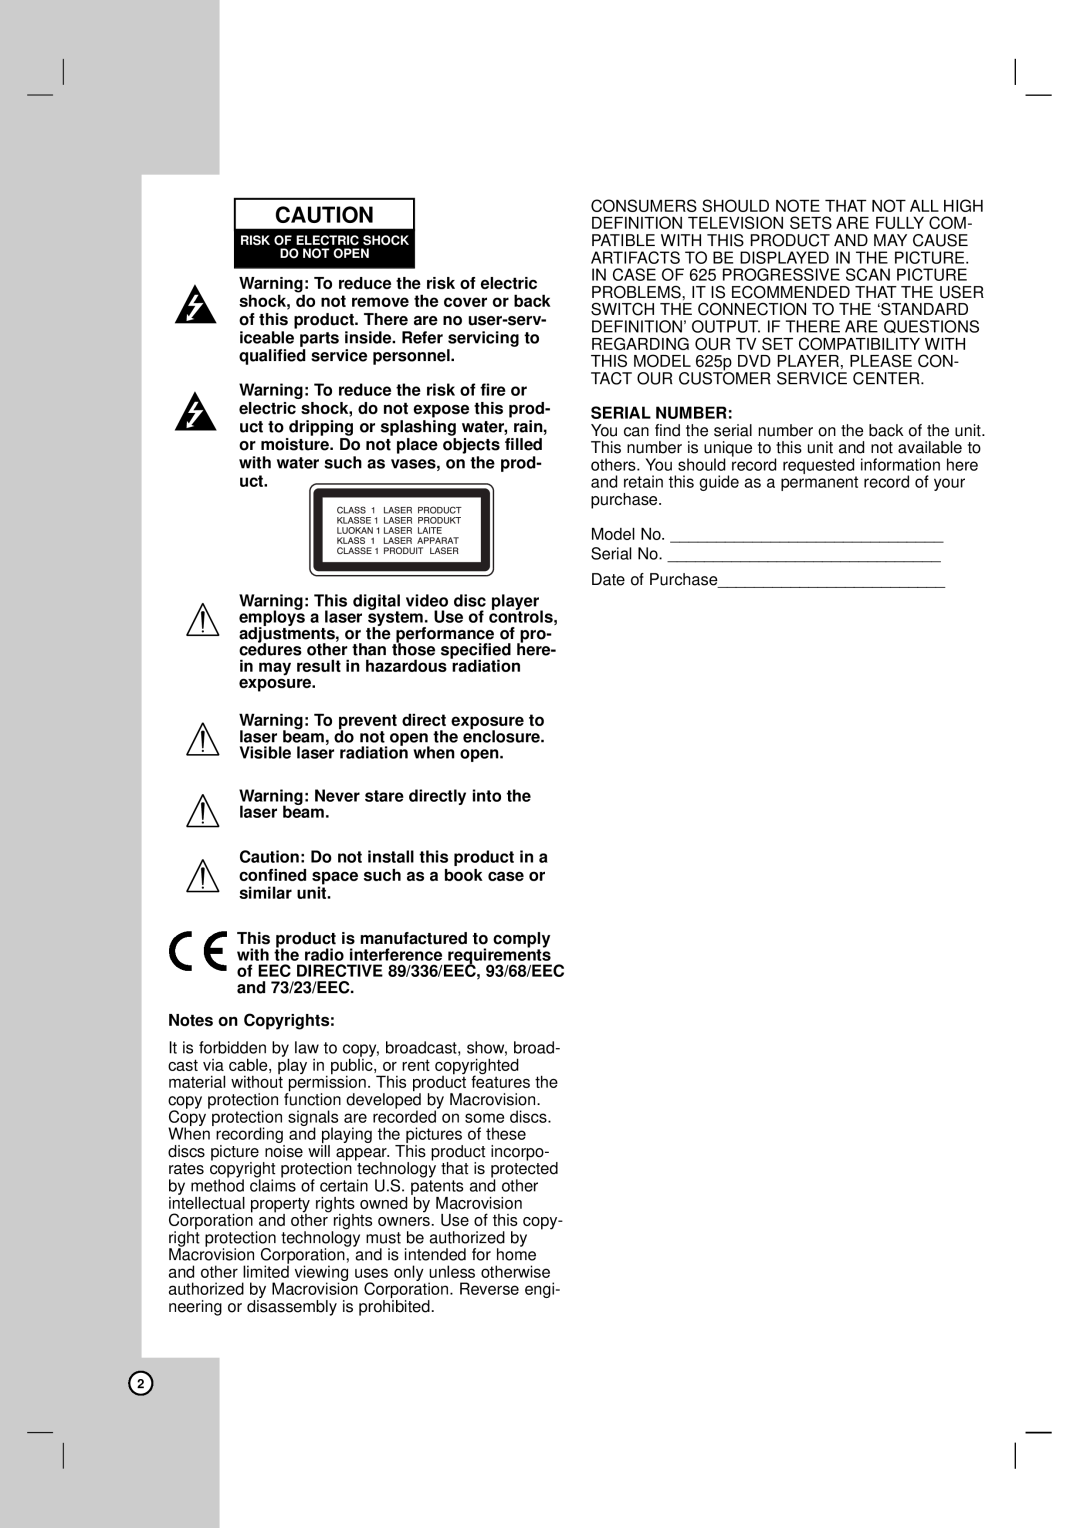 LG Electronics LH-CX245 owner manual Warning Never stare directly into the laser beam, Notes on Copyrights, Serial Number 